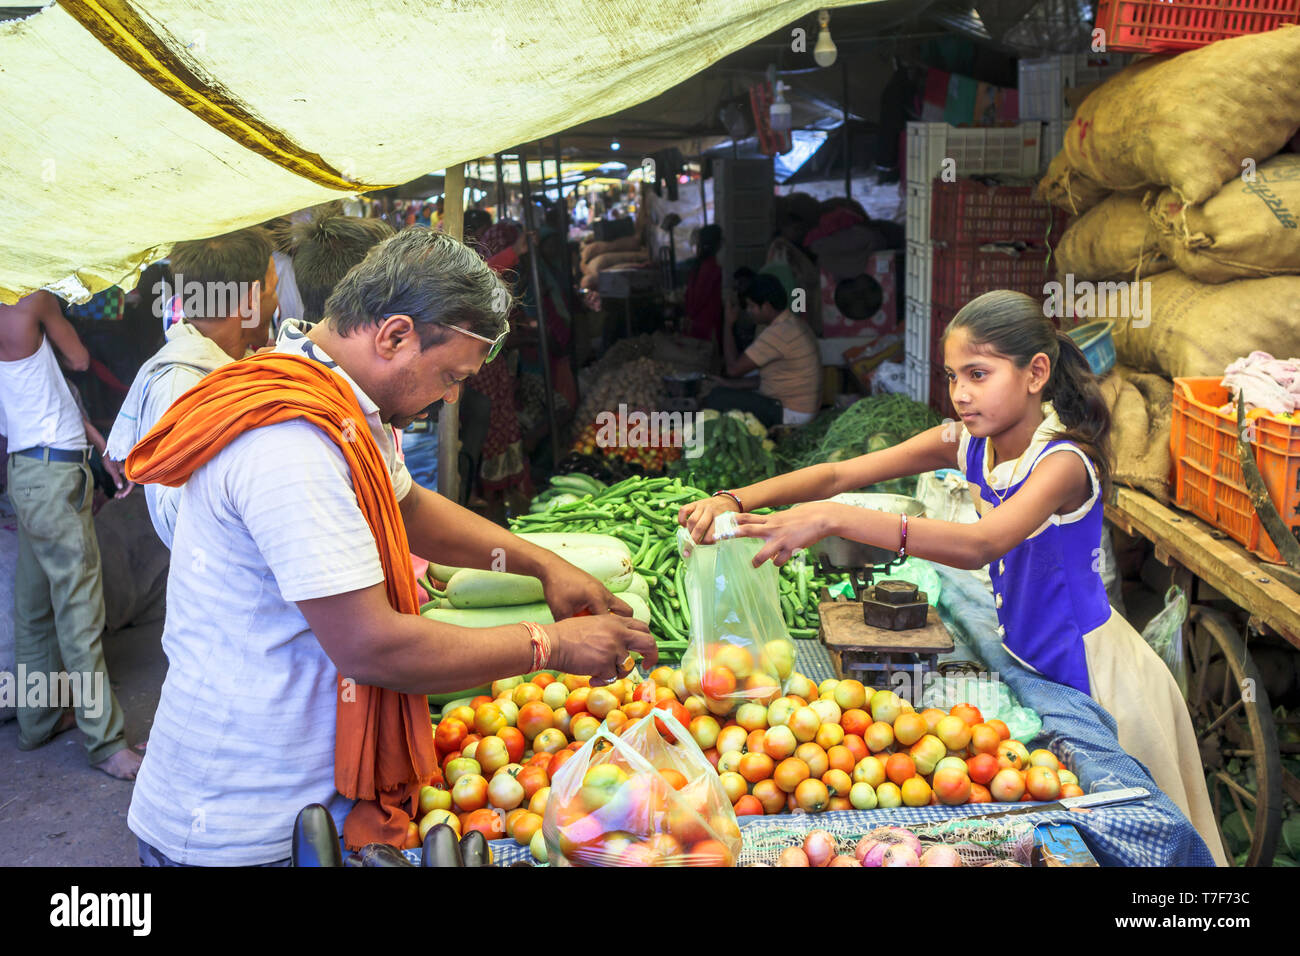 Young girl working in a local market serving fruit and vegetables from a stall in Shahpura, Dindori district, central Indian state of Madhya Pradesh Stock Photo